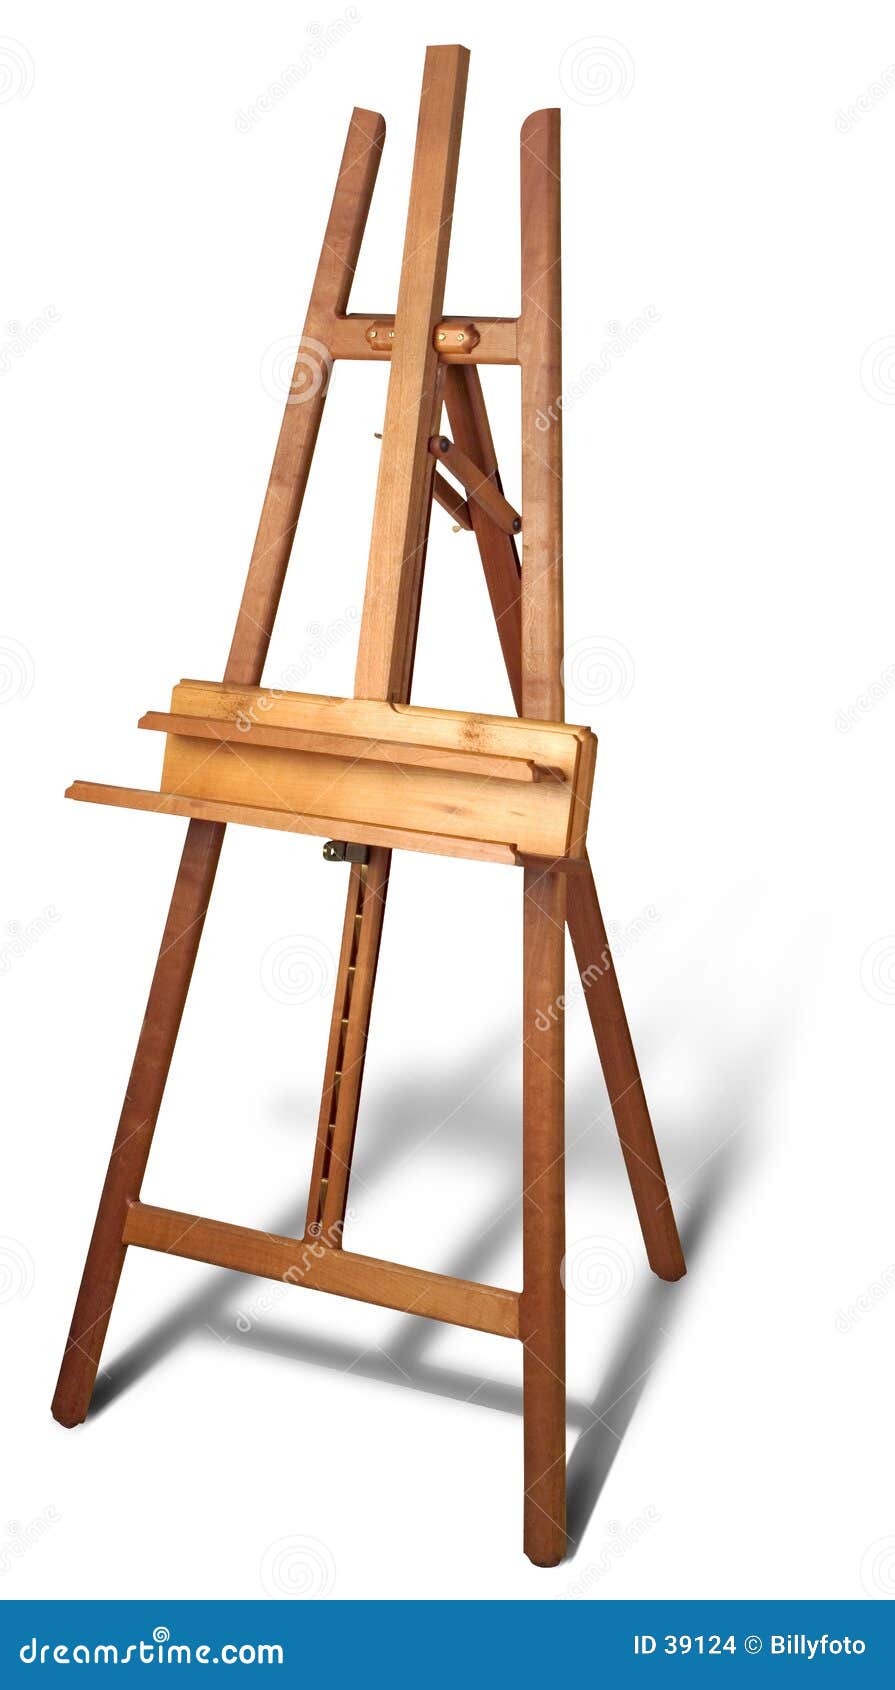 Wooden Easel Stock Images - Image: 39124